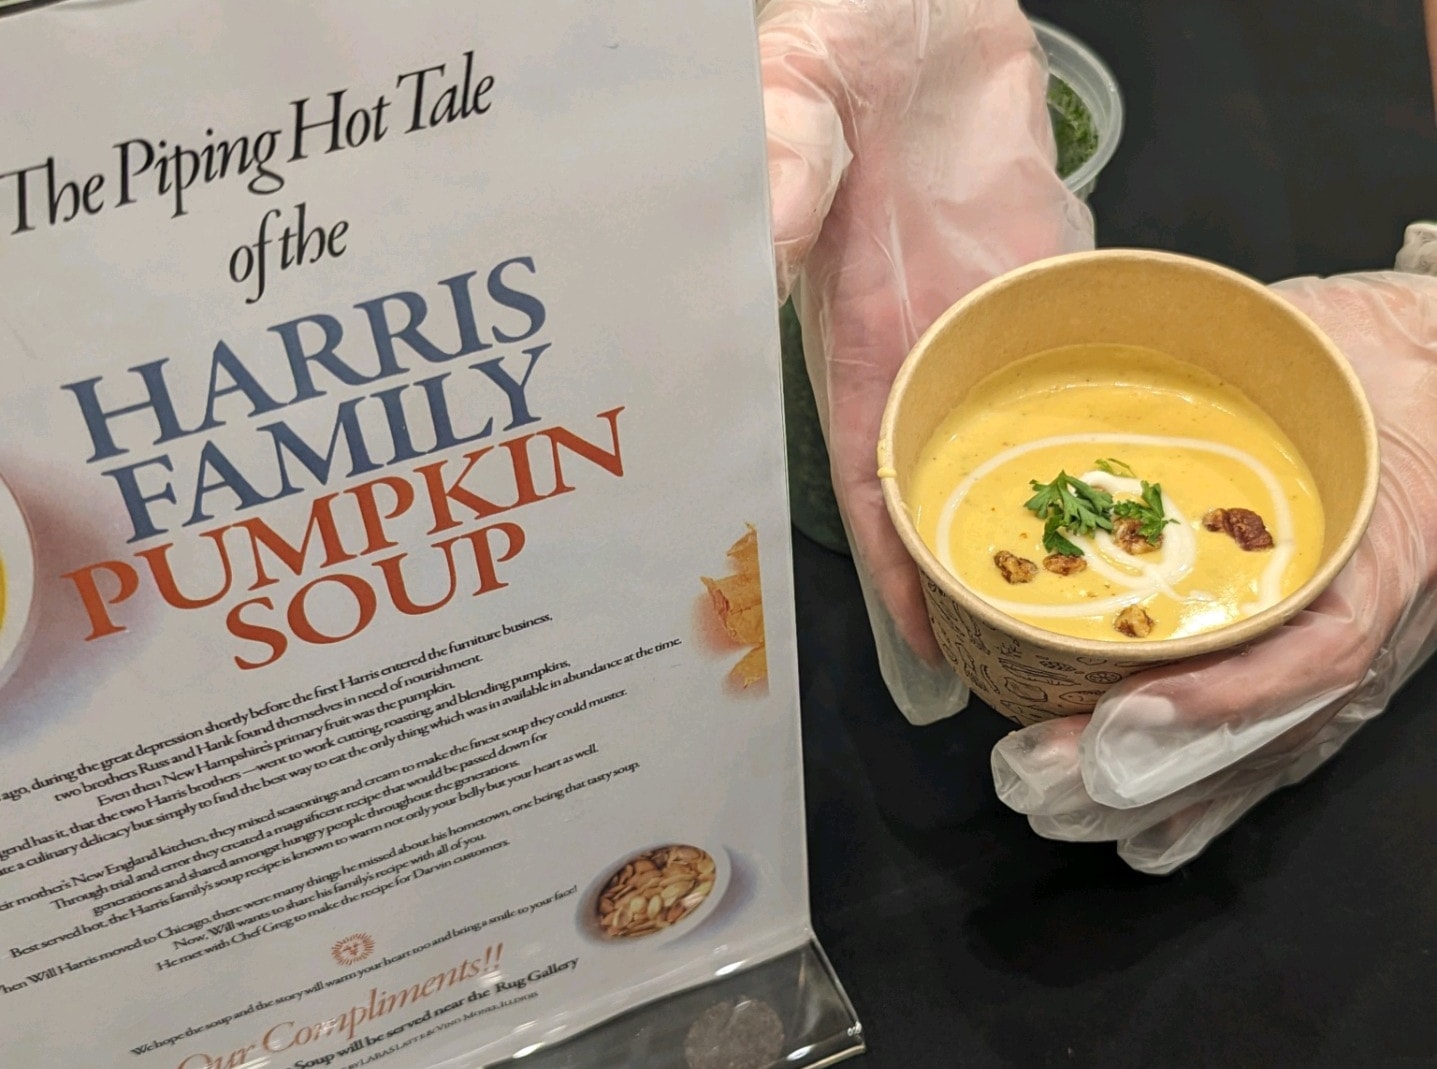 2023 - Will Harris President of Darvin shares family Pumpkin Soup Recipe - served at Darvin Furniture & Mattress